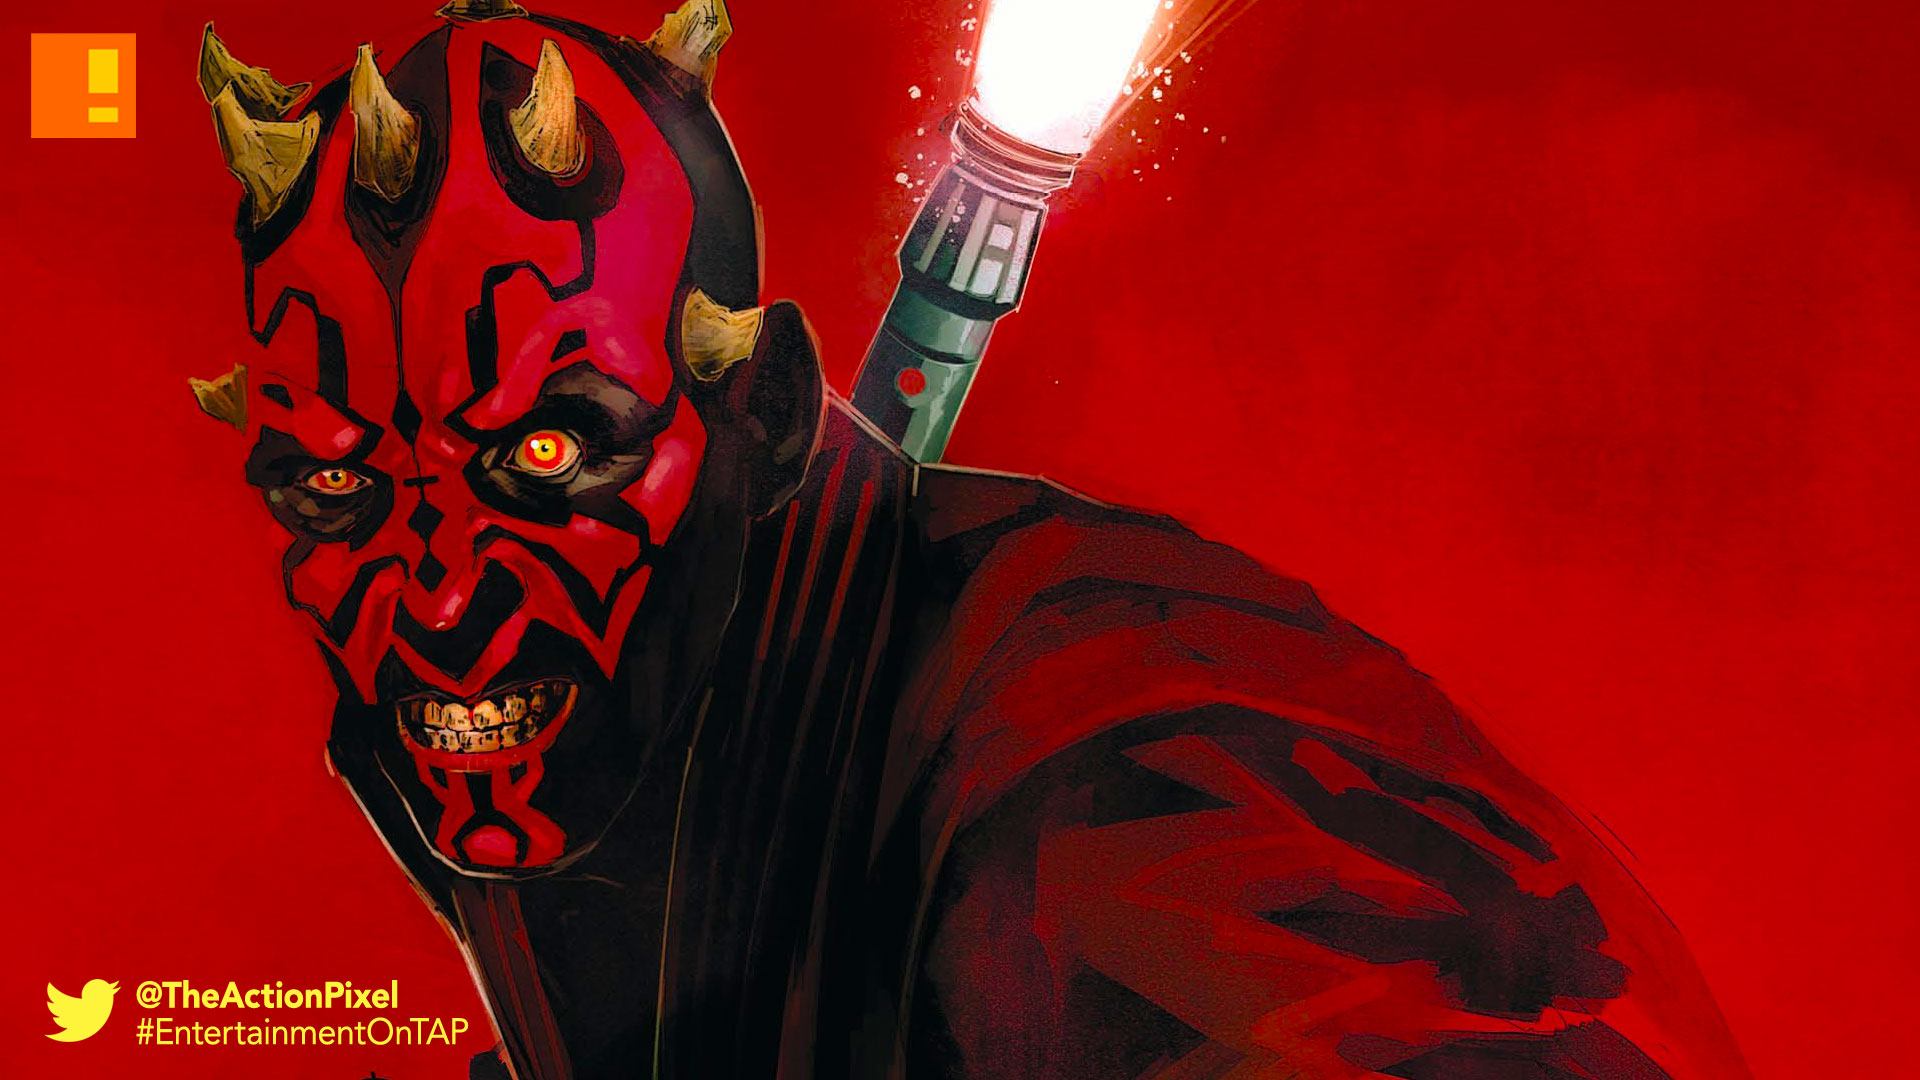 darth maul, star wars, lucasfilm, star wars comic, comics, marvel, the action pixel, entertainment on tap, darth sidious, lightsaber, dark side, force, disney, marvel comics, the action pixel, entertainment on tap